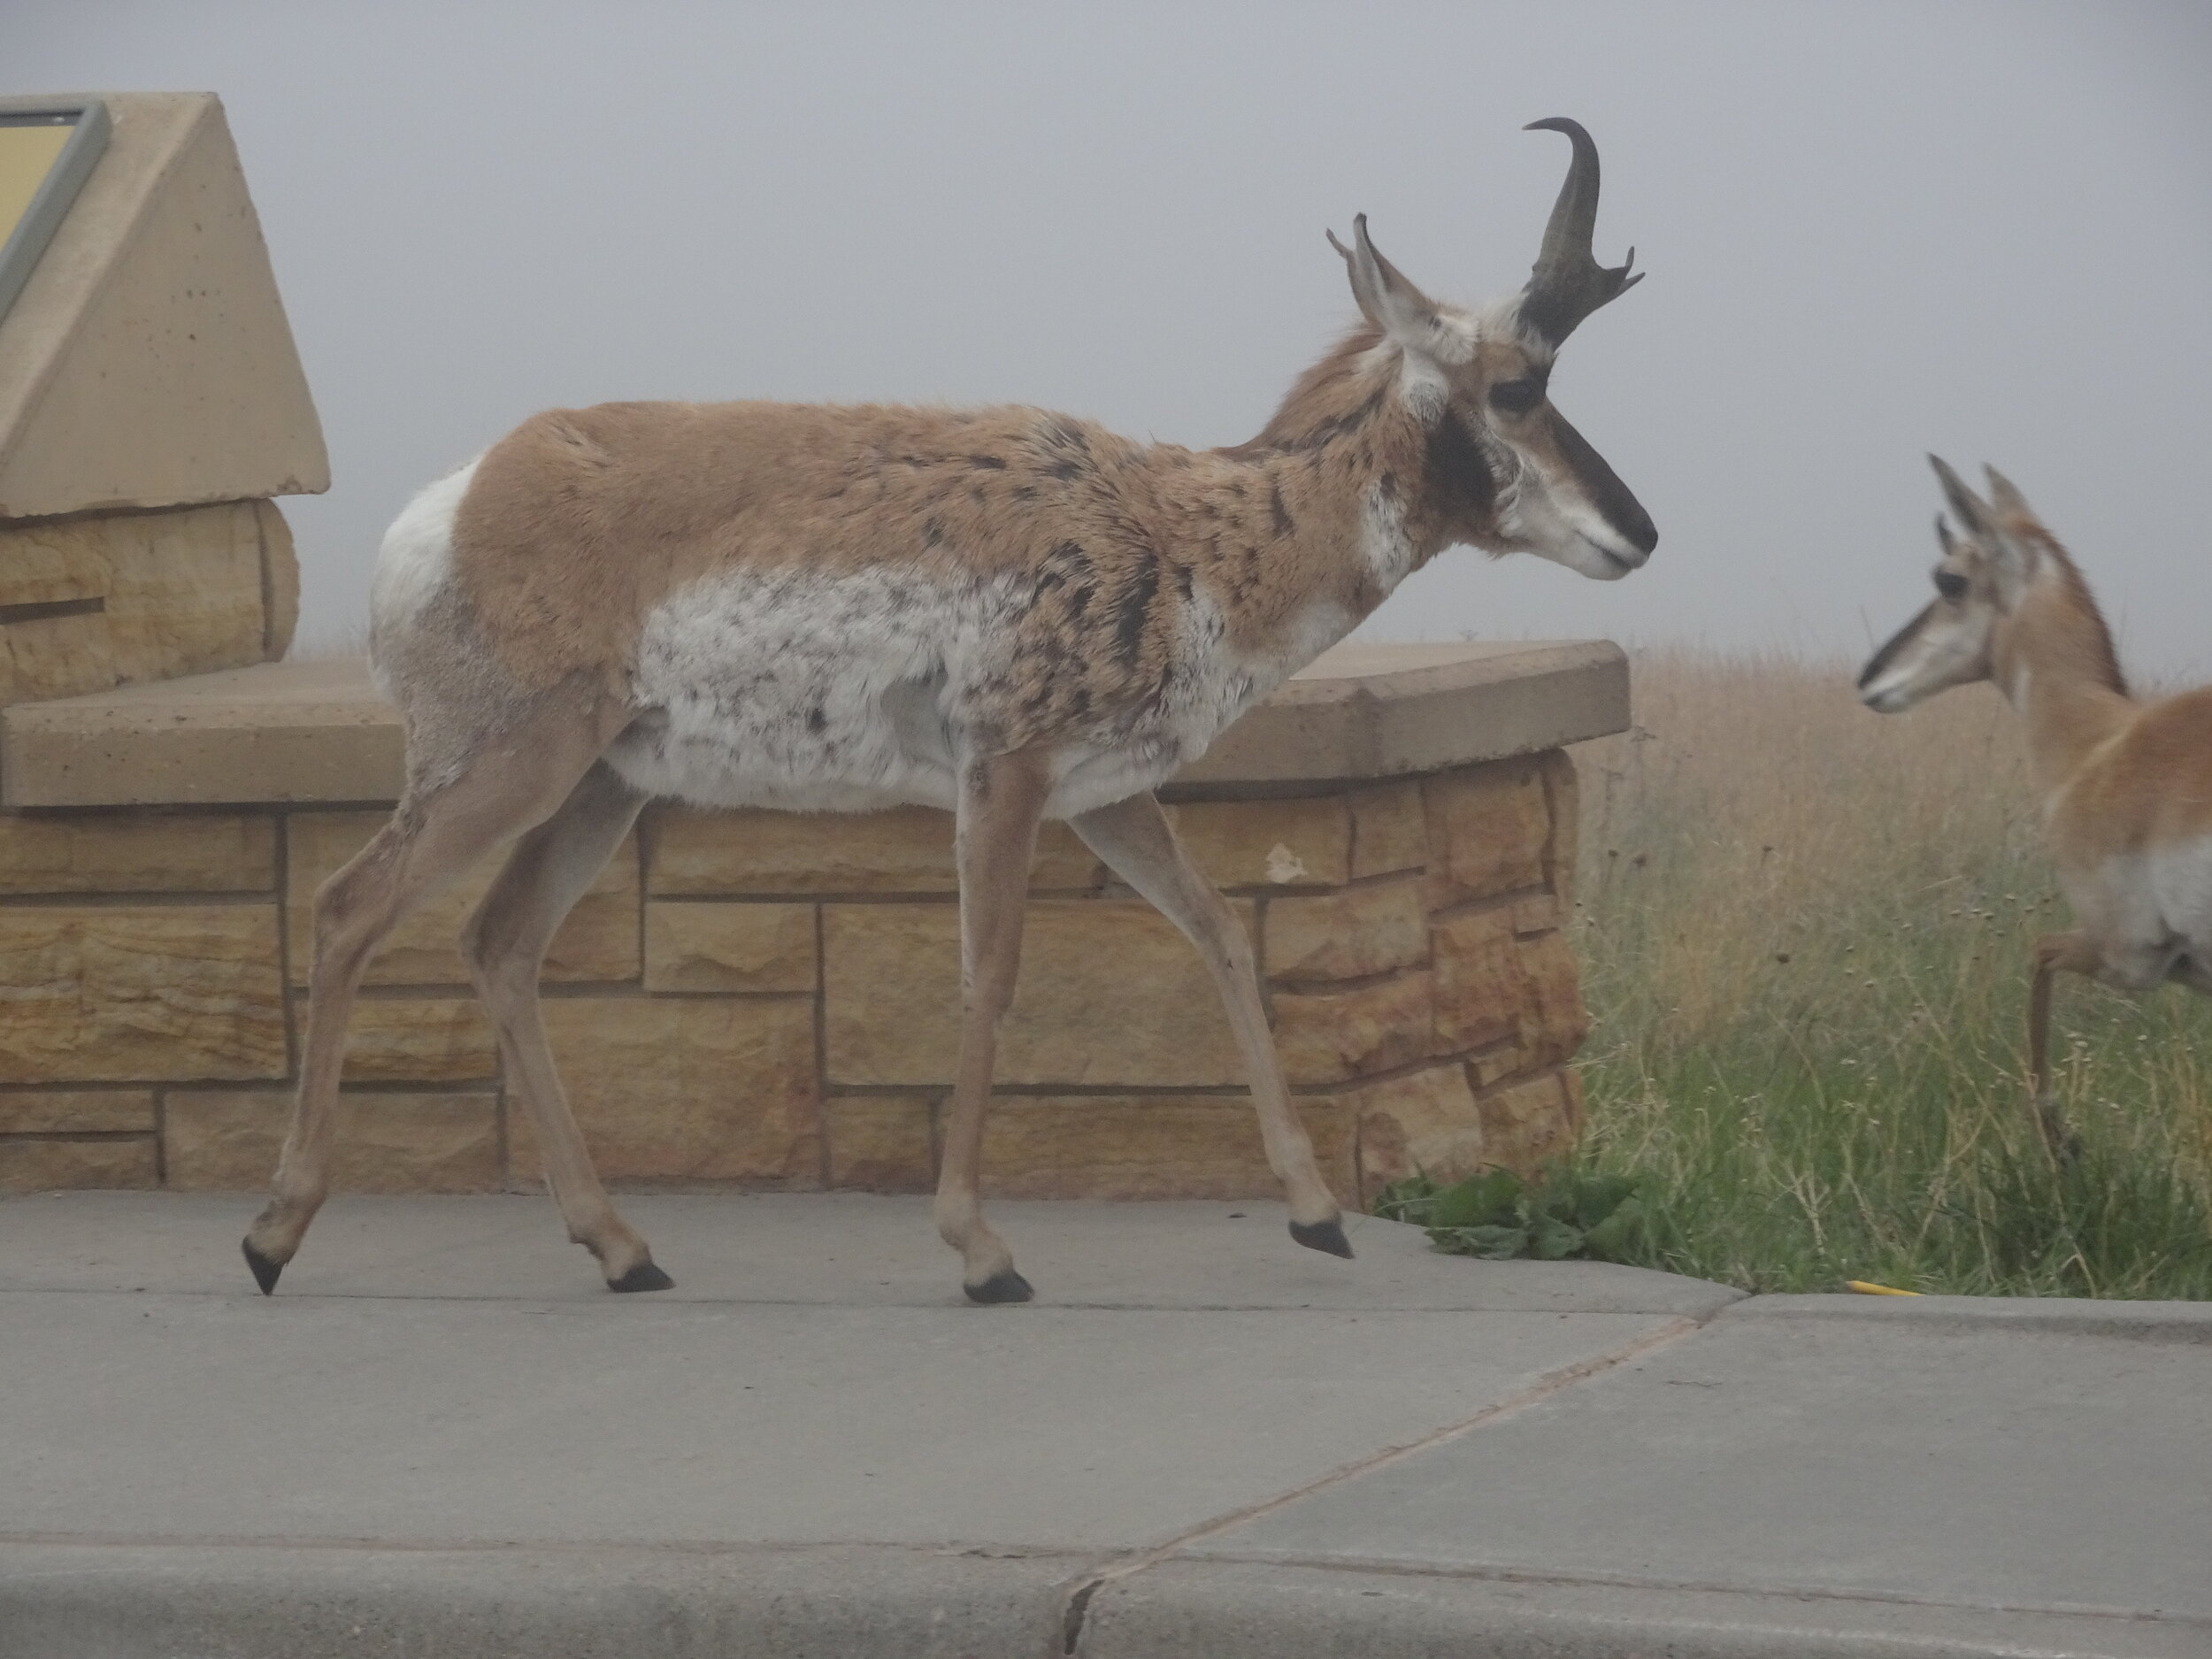 Pronghorn in the Fog at Custer State Park, S.D.   Photo by Karen Boudreaux, 5/27/21